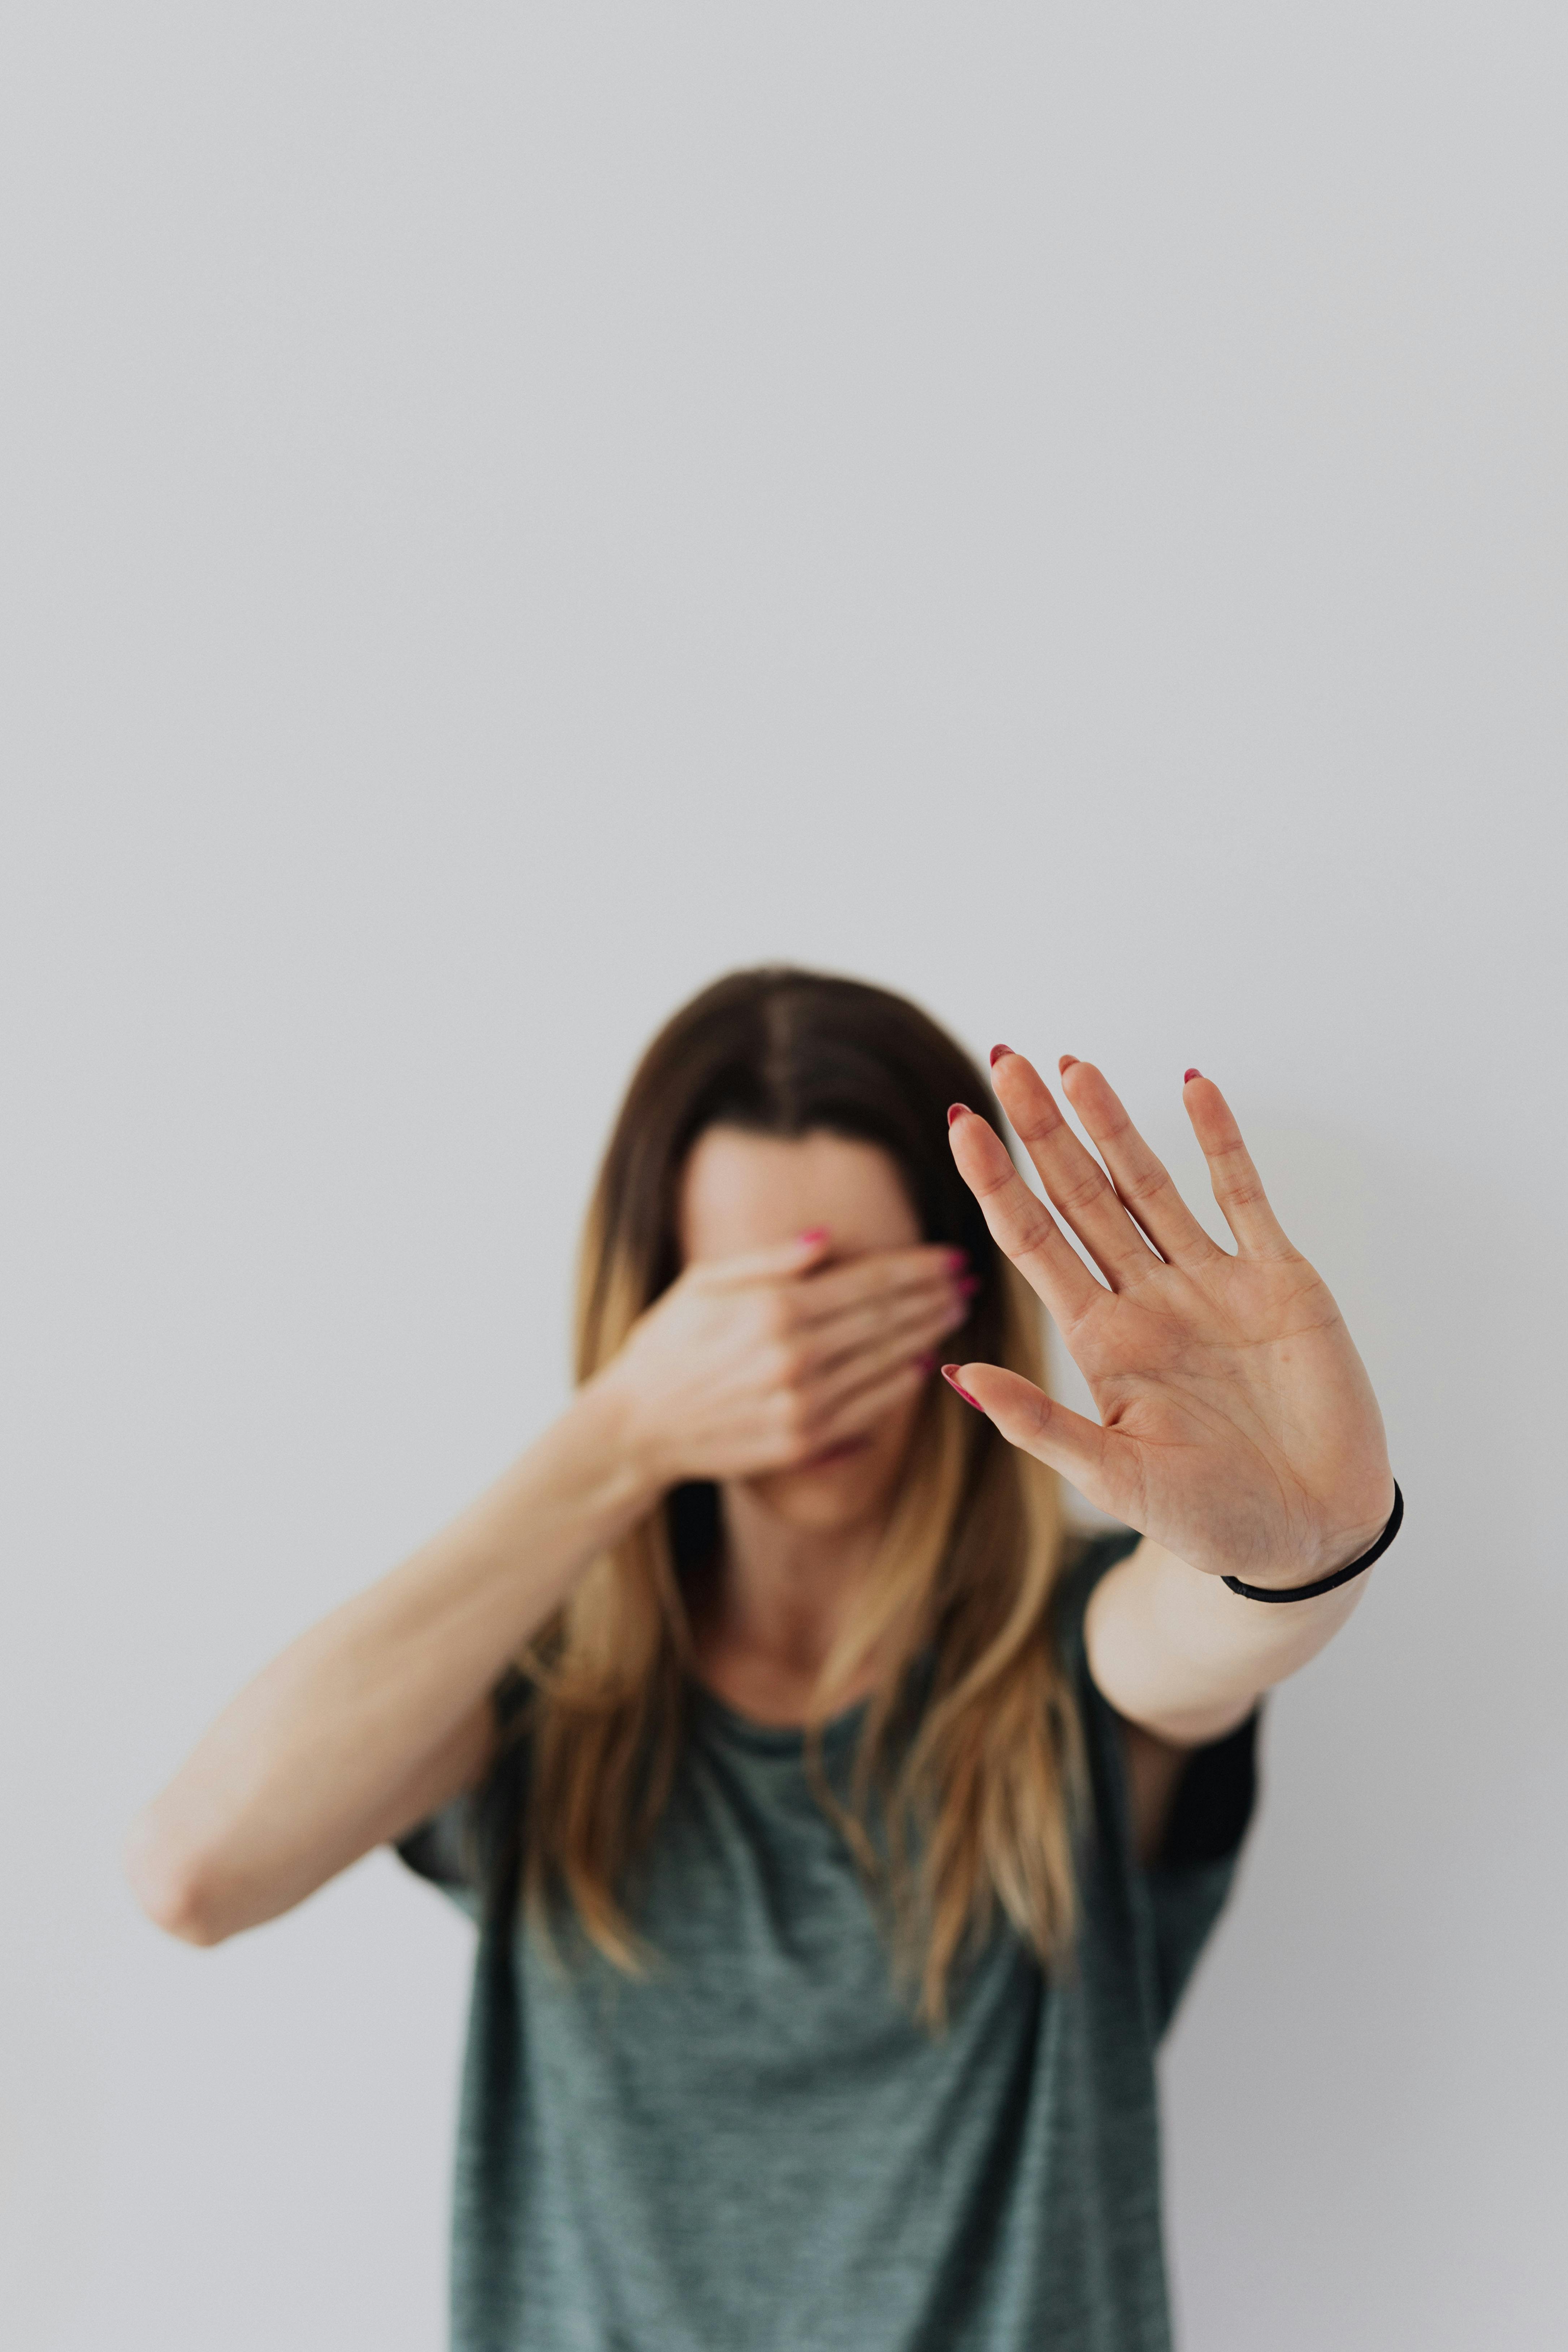 Free A Woman Covering Her Face with Hand and Showing a Stop